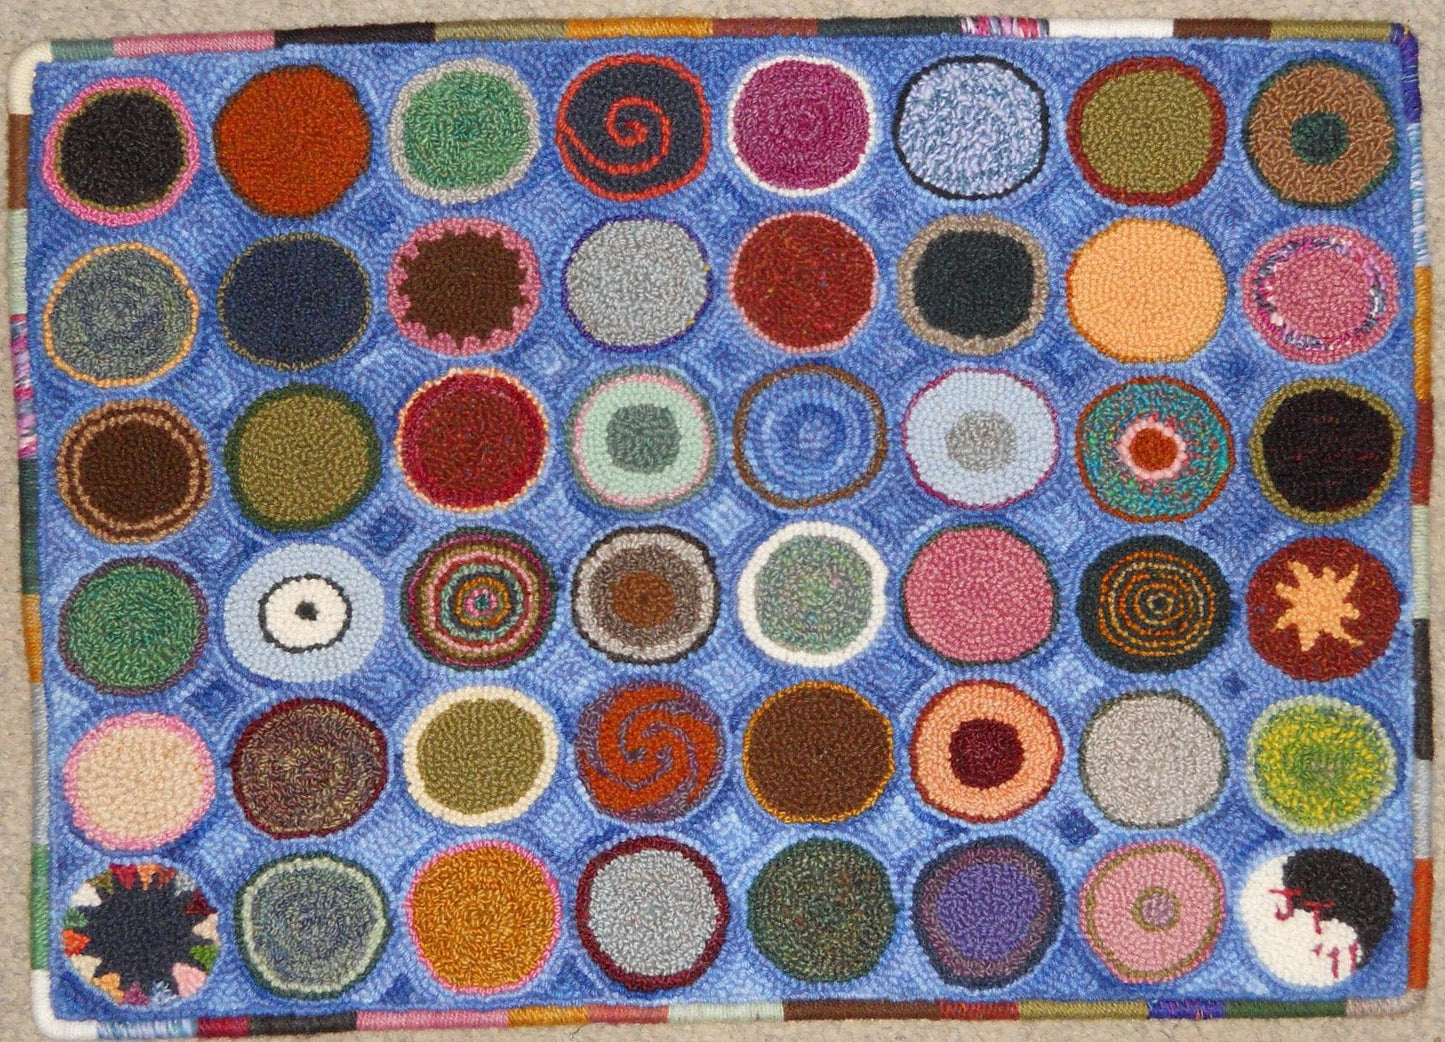 Penny Small Pattern on linen, 21"x28.5"